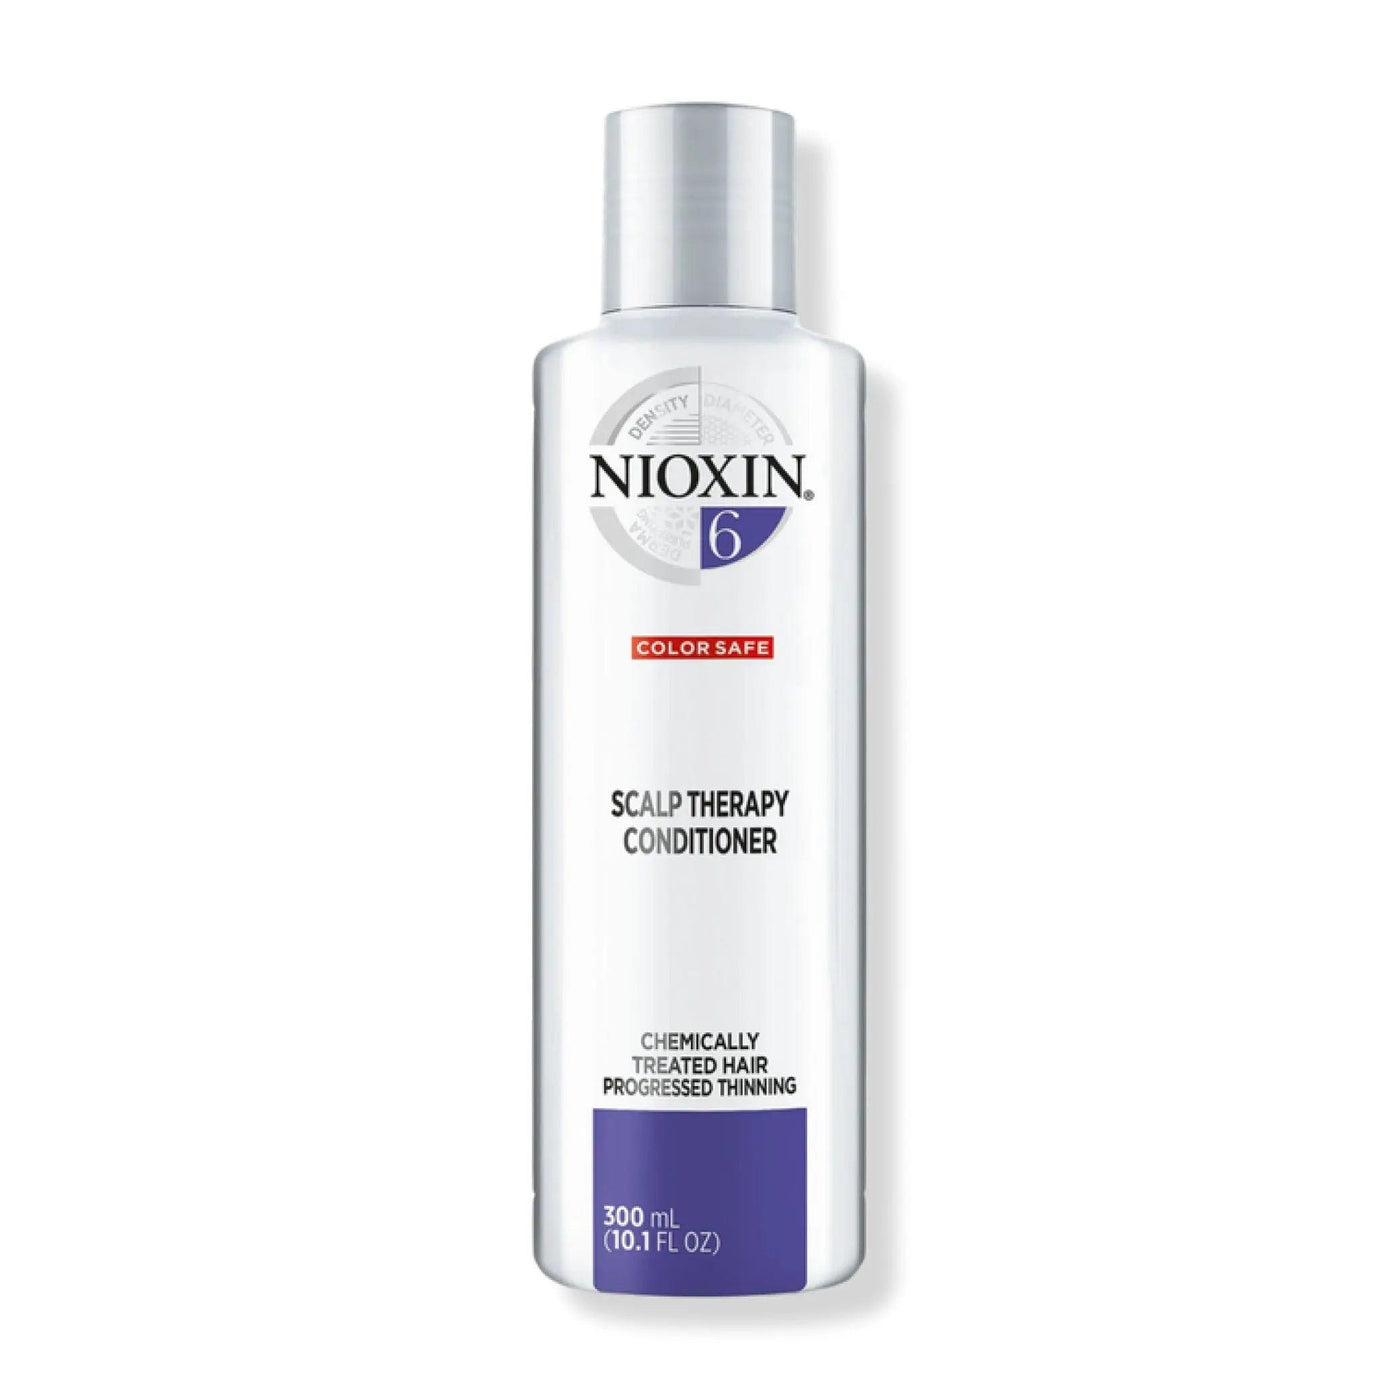 System 6 Scalp Therapy Conditioner Nioxin Boutique Deauville